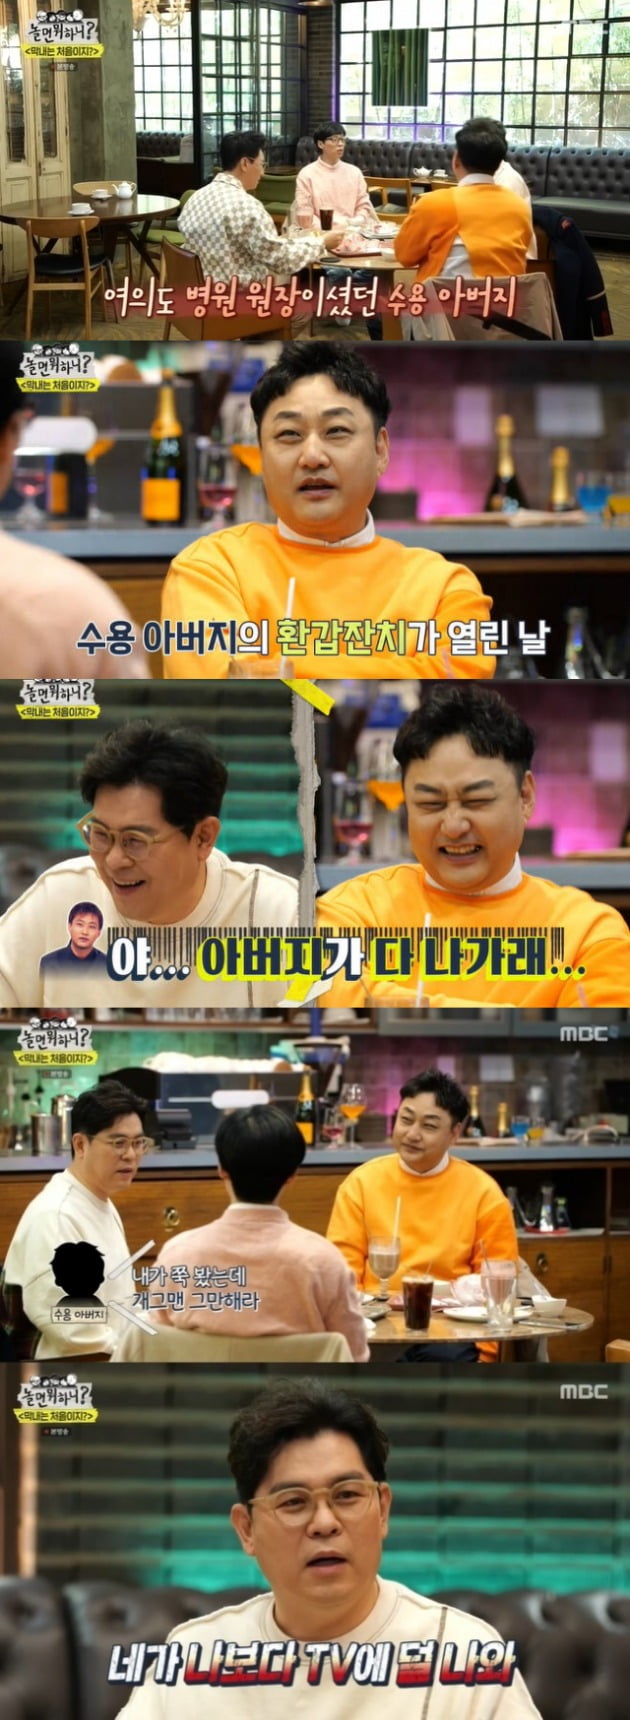 It was revealed that Kim Soo-yongs father was the director of the Yeouido hospital, while the friendship of Cho Dong-ari, who caught Yoo Jae-Suk, who was trying to quit broadcasting, was impressed.In the 126th MBC entertainment Hangout with Yo (hereinafter referred to as Noll) broadcast on the 26th, the meeting of Jo Dong-Ari members Yoo Jae-Suk, Kim Yong-man, Ji Suk-jin and Kim Soo-yong was included.The members of the group recalled Kim Soo-yongs anecdote at the partys happy party, which was invited to a serious feast at the hotel.Kim Yong-man said, At that time, there were decent people in suits.But we wanted to make a good atmosphere, so Jo Hye-ryun would have gone out at that time. Kim Soo-yongs father, who saw it, looked disapproved. Ji Suk-jin said, At that time, Kim Soo-yongs fathers expression was to stop.However, his colleagues went out without notice and went out and eventually got kicked out. Kim Yong-man laughed when he said, The acceptor came and said, My father told me to go out.Kim Yong-man explained that Suyong was a famous person to be a father, and Yoo Jae-Suk added, He was the director of the hospital in Yeouido.Kim Yong-man said, After Su-yong became a comedian, my father called Su-yong and said, Ive seen him all the time, but you stop being a comedian. So Su-yong said, Why?My father said, You are less on TV than I am. On that day, Yoo Jae-Suk told an anecdote during his obscurity: Yoo Jae-Suk had no work at all compared to Kim Yong-man, who was good at the time.My brother was a junior at school and so close that I tried to put it here and there, Yoo Jae-Suk said.However, at the time, Yoo Jae-Suk was too floating to save the gag, and eventually he was out of the field.Kim Yong-man said, That became a trauma to Park Jae-seok, and I saw him wandering at that time.Yoo Jae-Suk said: So thank you to my brothers, I tried to quit (on the air day) but my brothers caught me.I liked it, so I chose it, but I did not think it was right. I worked at Hope House. Yongman, Yong-in, and Suhong came to me and asked me to do a special step-by-step on Chuseok. I learned a lot from my brother, and when I was feeling feelings, I learned a lot of ordinary citizen interviews.I wanted to talk to the citizen who I saw for the first time. He expressed his gratitude to Kim Yong-man who led him.Kim Yong-man expressed his affection, saying, I do not want to go to the recording, and I was burdened, but I was comfortable with a good person.Kim Yong-man said, In fact, Park Jae-seok has just been humbled, I have to eat on one of the stalls.Ji Suk-jin also nagged, Do not you have to lay down a tissue?Kim Yong-man then tells Yoo Jae-Suk, What are you worried about, do not eat meat, and tell your troubles. Yoo Jae-Suk said, I think because I talk about troubles.I was in my early 20s and I was so sick that I had no place to go. Kim Yong-man said, When XX met? Yoo Jae-Suk said, Why do you tell me your name? And he said, Do you talk about me? I know.I know everything here, he shouted, laughing.I got the breakup notice so early that I had nowhere to go, and Yongman called my brother and told him to come home, so I went and he was sleeping, Yoo Jae-Suk said.Kim Yong-man woke up and opened his eyes and said, Learn your life, learn love and slept again.Yoo Jae-Suk said, I still remember the sound.Kim Yong-man also told Yoo Jae-Suk, Tell me youre not Yune, Im evil. Kim Soo-yong also said, Come out today.Im a piece of crap. Kim Soo-yong said, You were not good, you were not cheap in the past. Ji Suk-jin also brought out an anecdote that shed tears while talking about Cho Dong-ari on TVN Yu Quiz on the Block.Kim Yong-man said, I have a hormone injection. Ji Suk-jin said, You just came up with four like this. After retirement, I sat in a hotel room and talked about a beer without any burden.It was not sadness, it was expectation, he said.On this day, Yoo Jae-Suk suggested meat packaging as well as calculating the meat house, and gave three people to the members of the group.